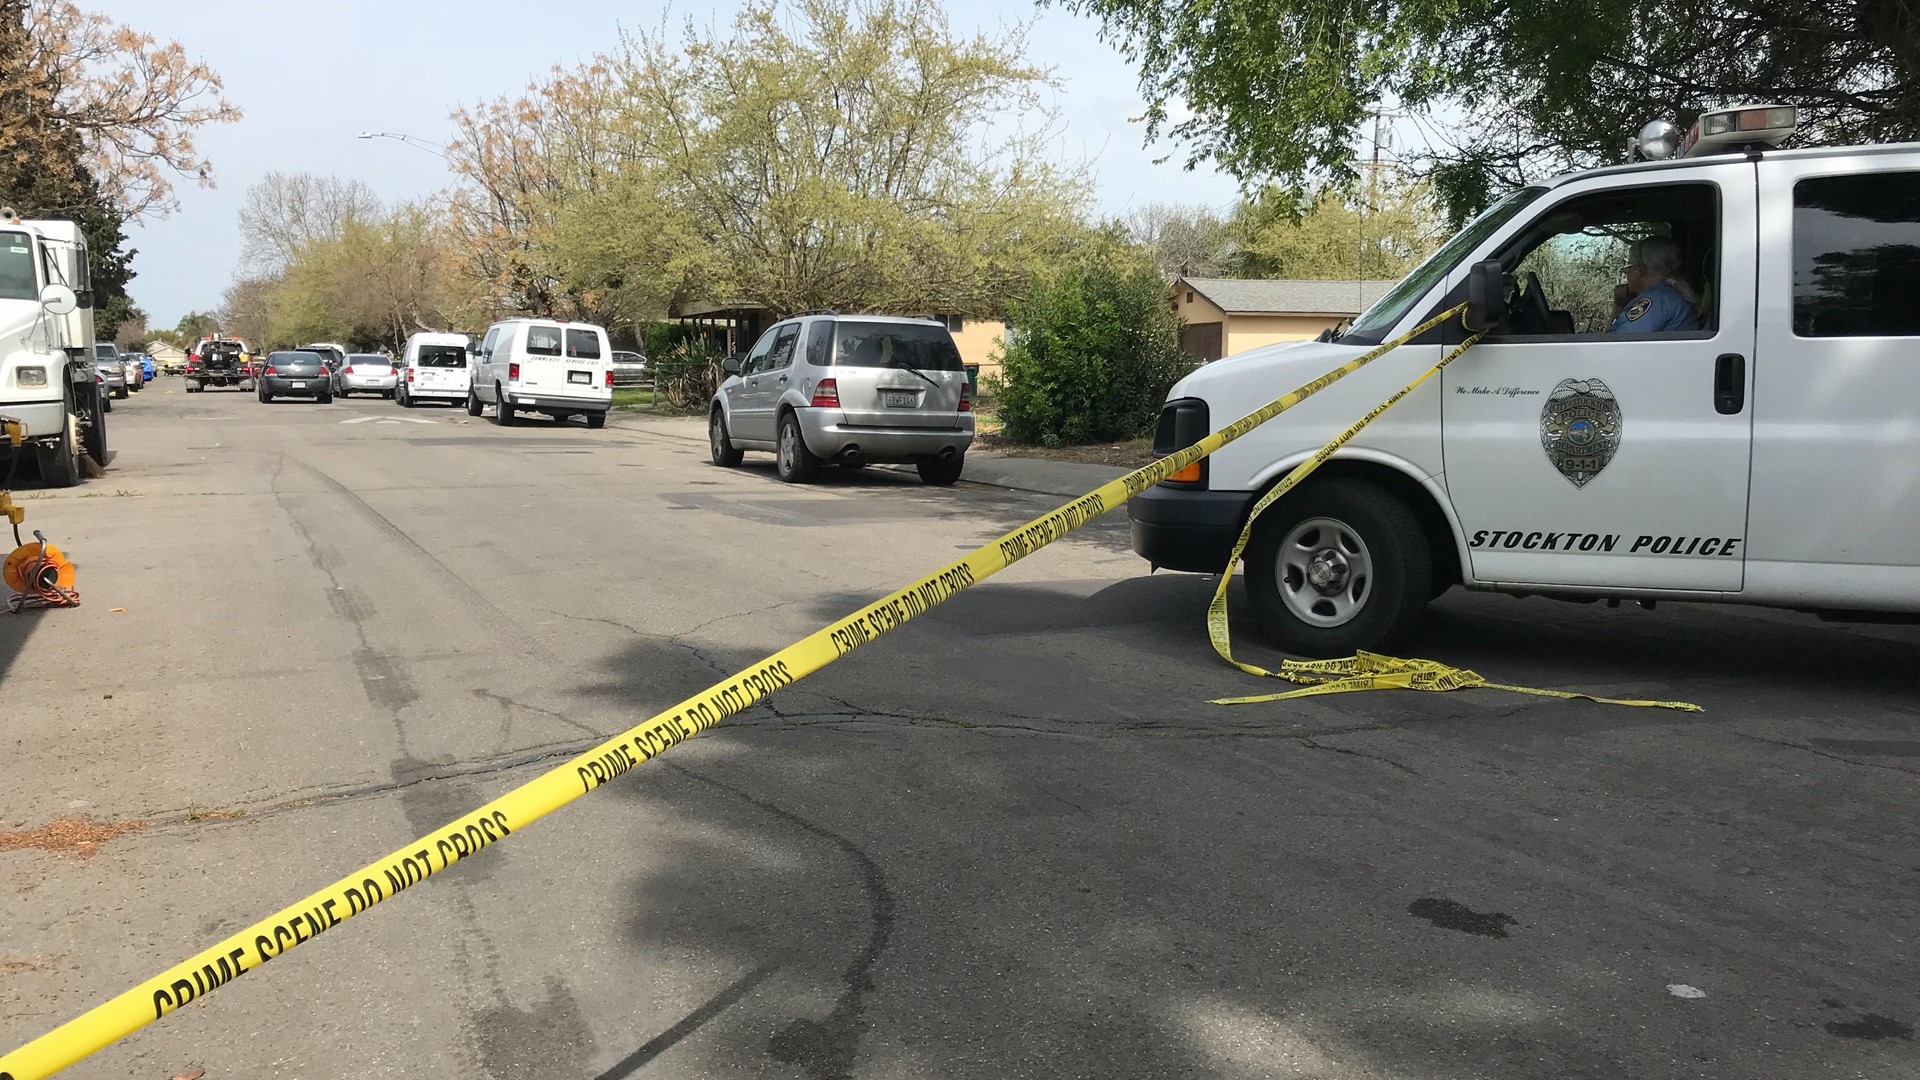 Five people are dead following three separate shooting over a very violent weekend in Stockton. Investigators say these three separate incidents do not appear to be connected and multiple people are likely responsible.